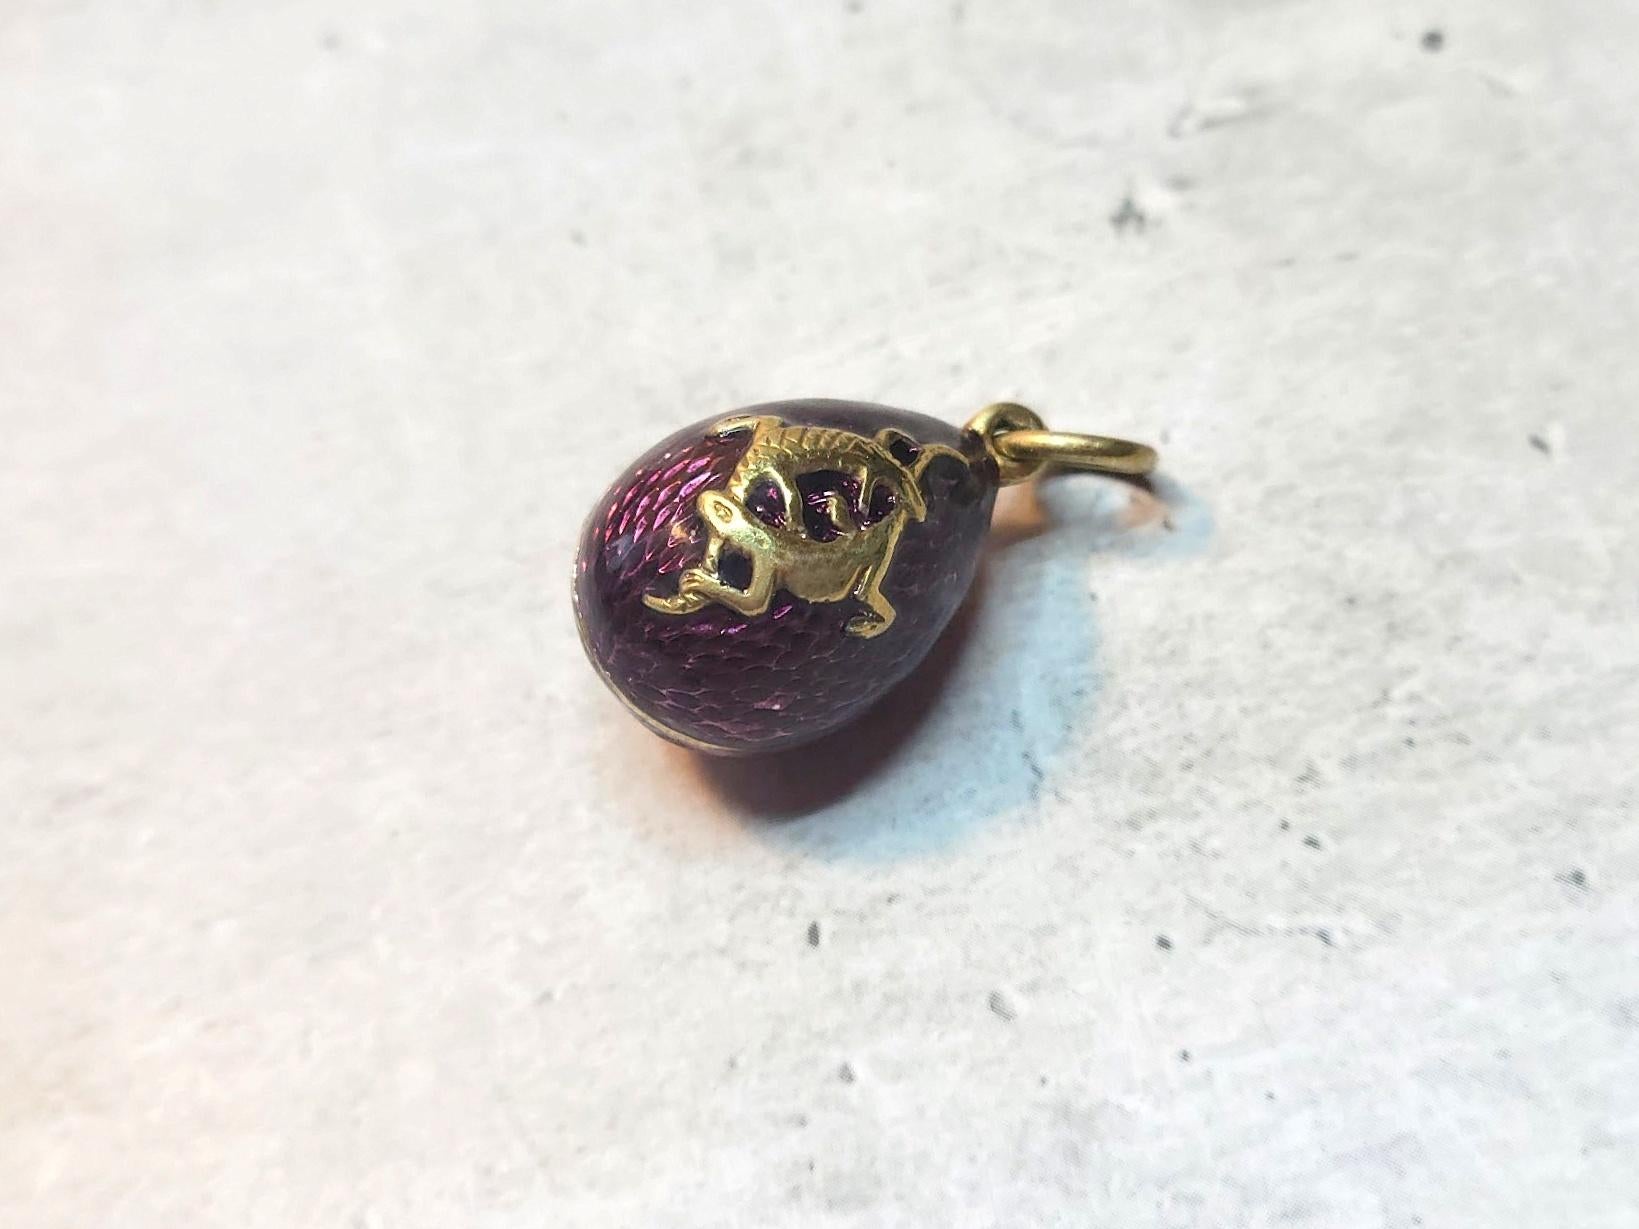 Presenting a stunning pendant designed in the shape of a Russian Imperial gilt silver and enamel egg with lizards. The body of the egg is enameled in a beautiful deep purple guilloche enamel. The use of different materials also adds to the charm of